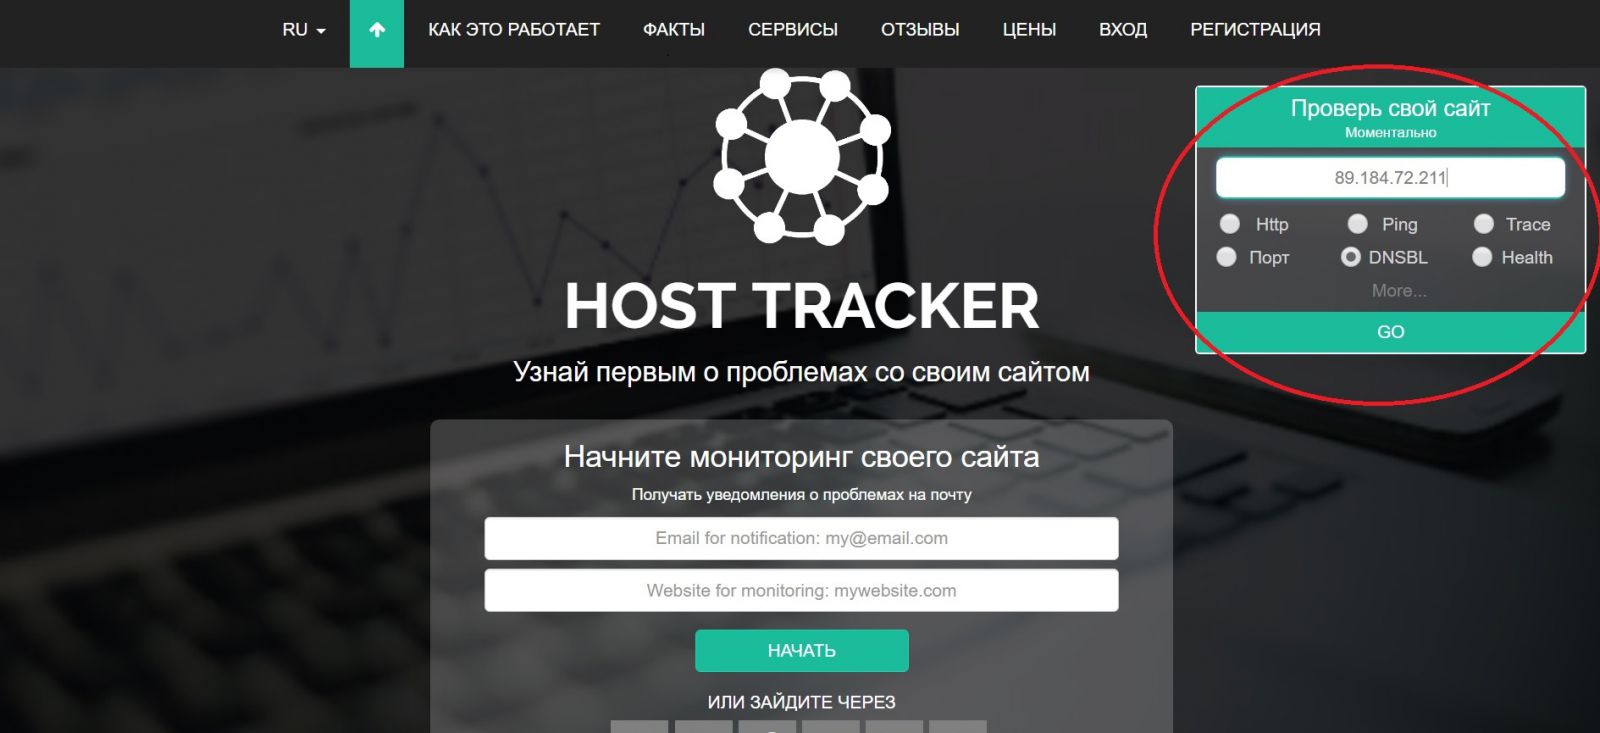 IP by Host Tracker check 